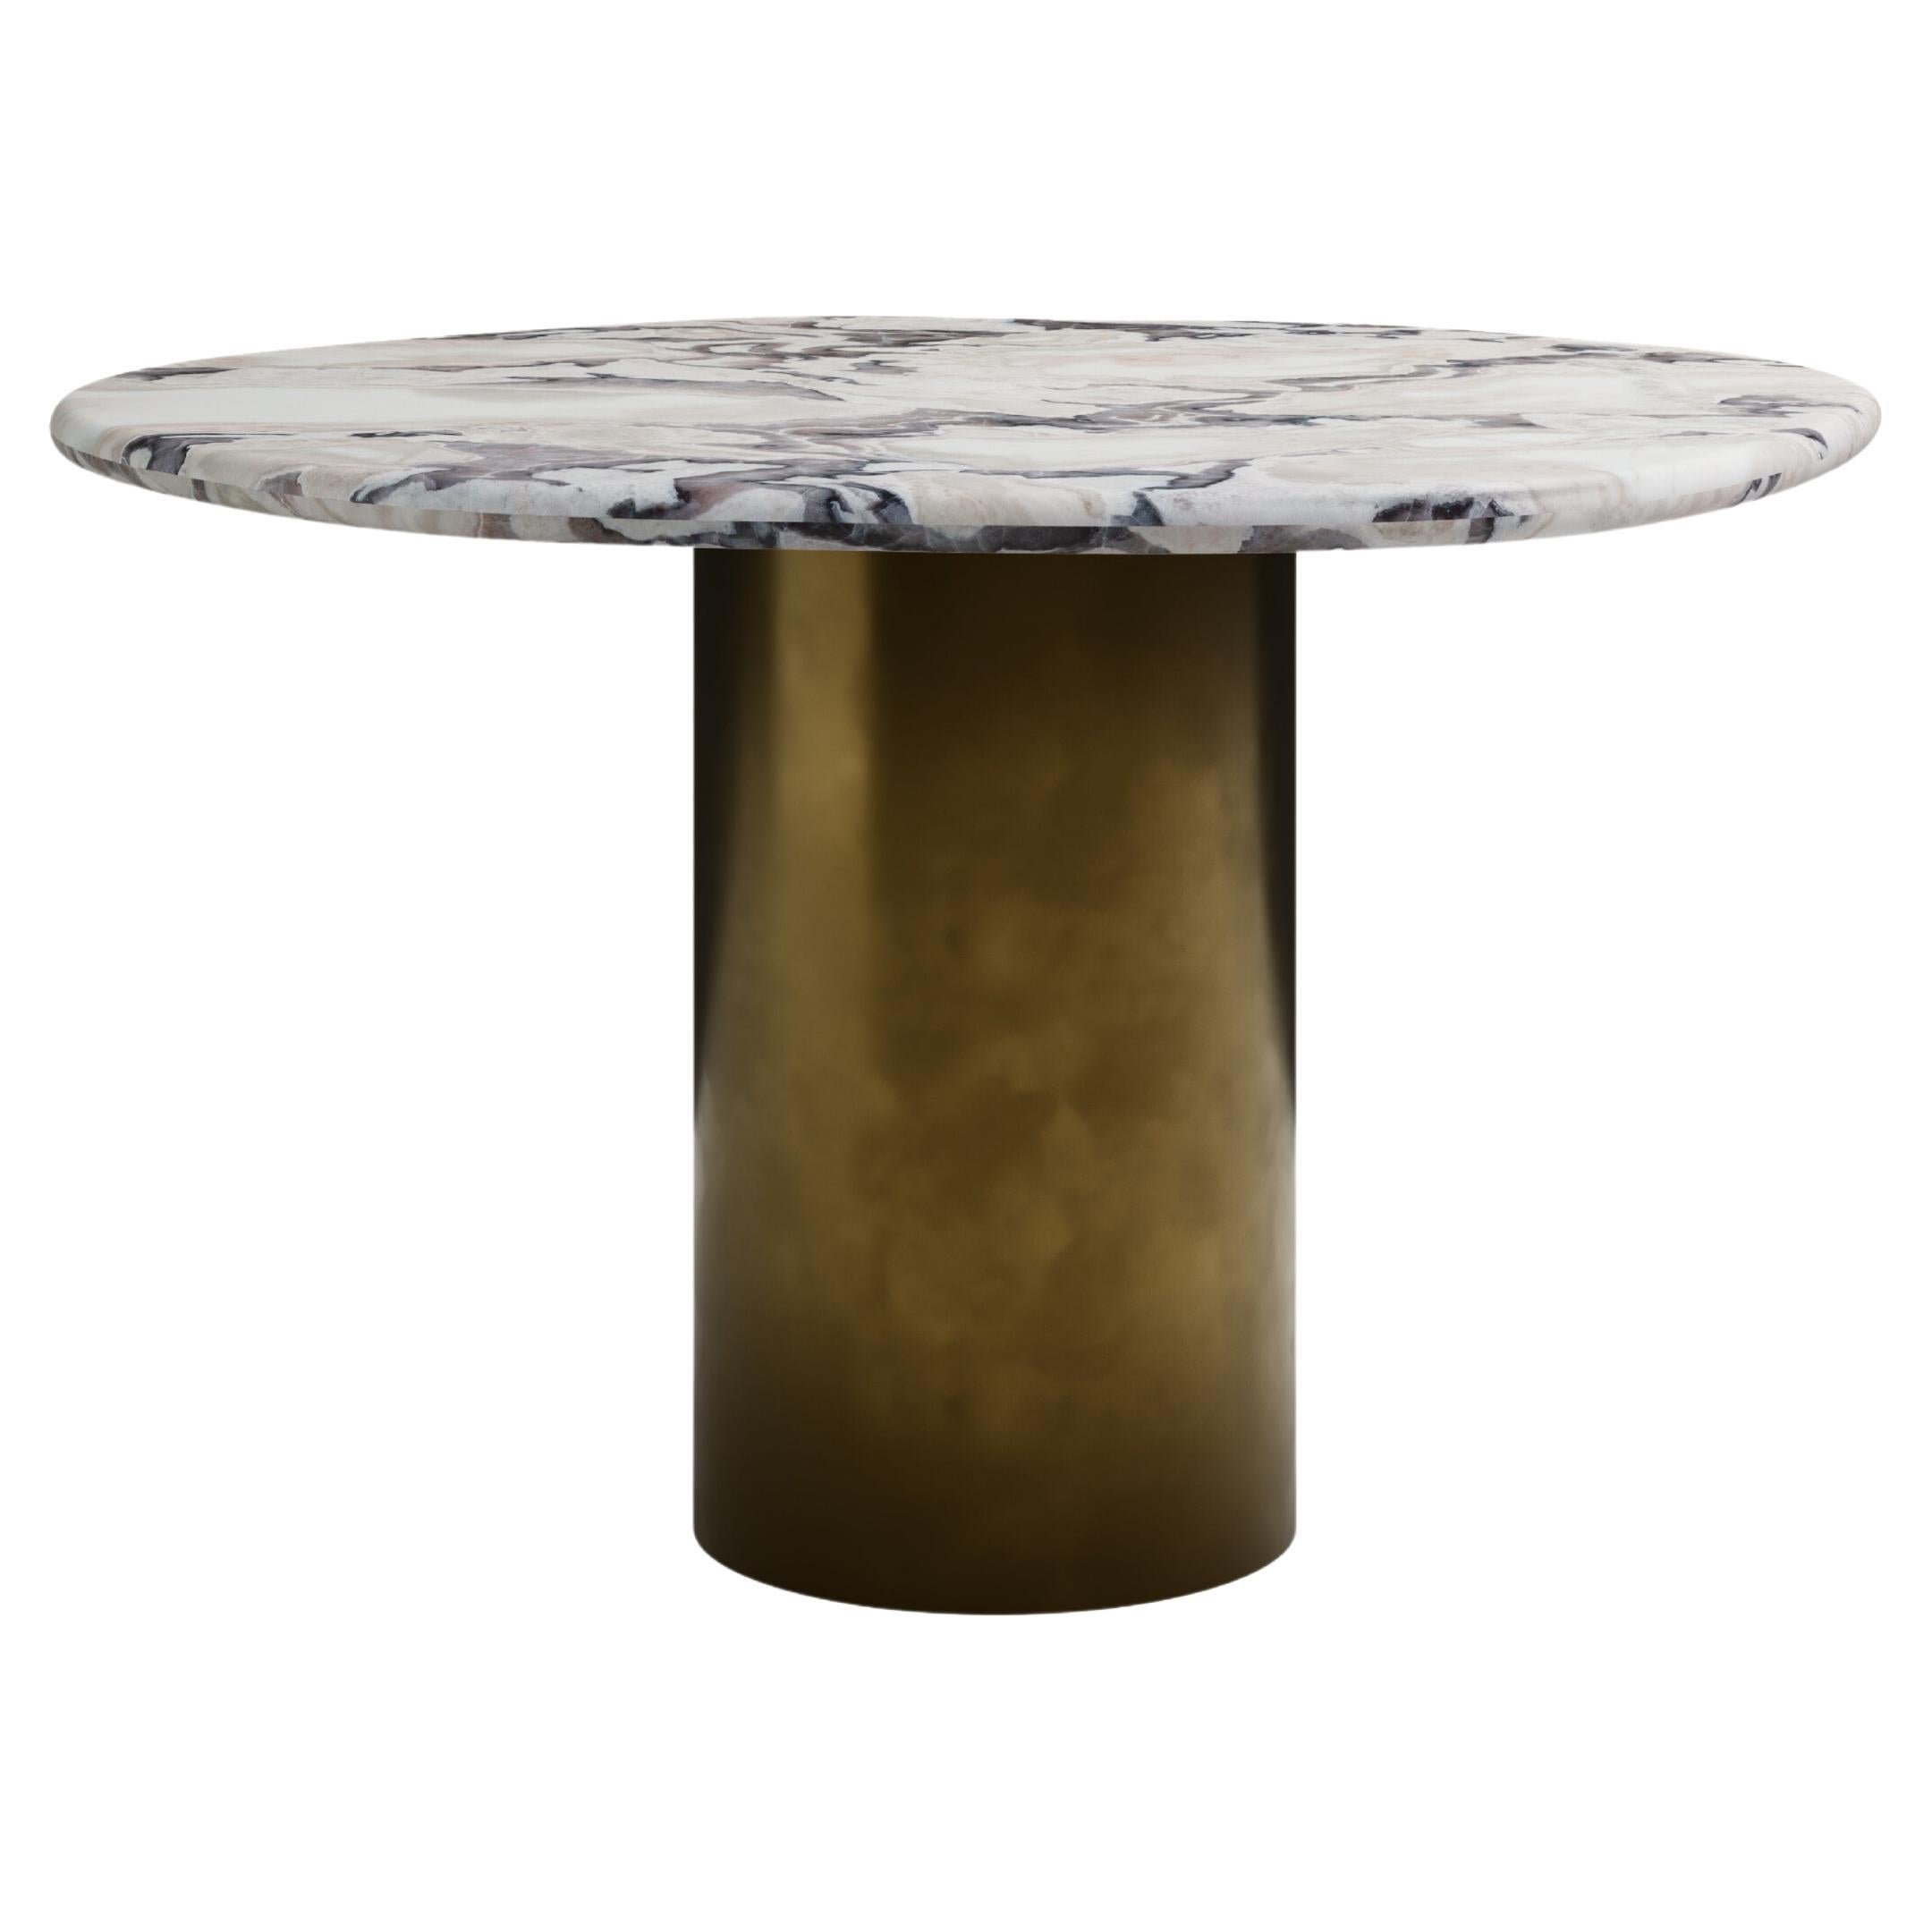 FORM(LA) Lago Round Dining Table 60”L x 60”W x 30”H Oyster Marble & Bronze For Sale